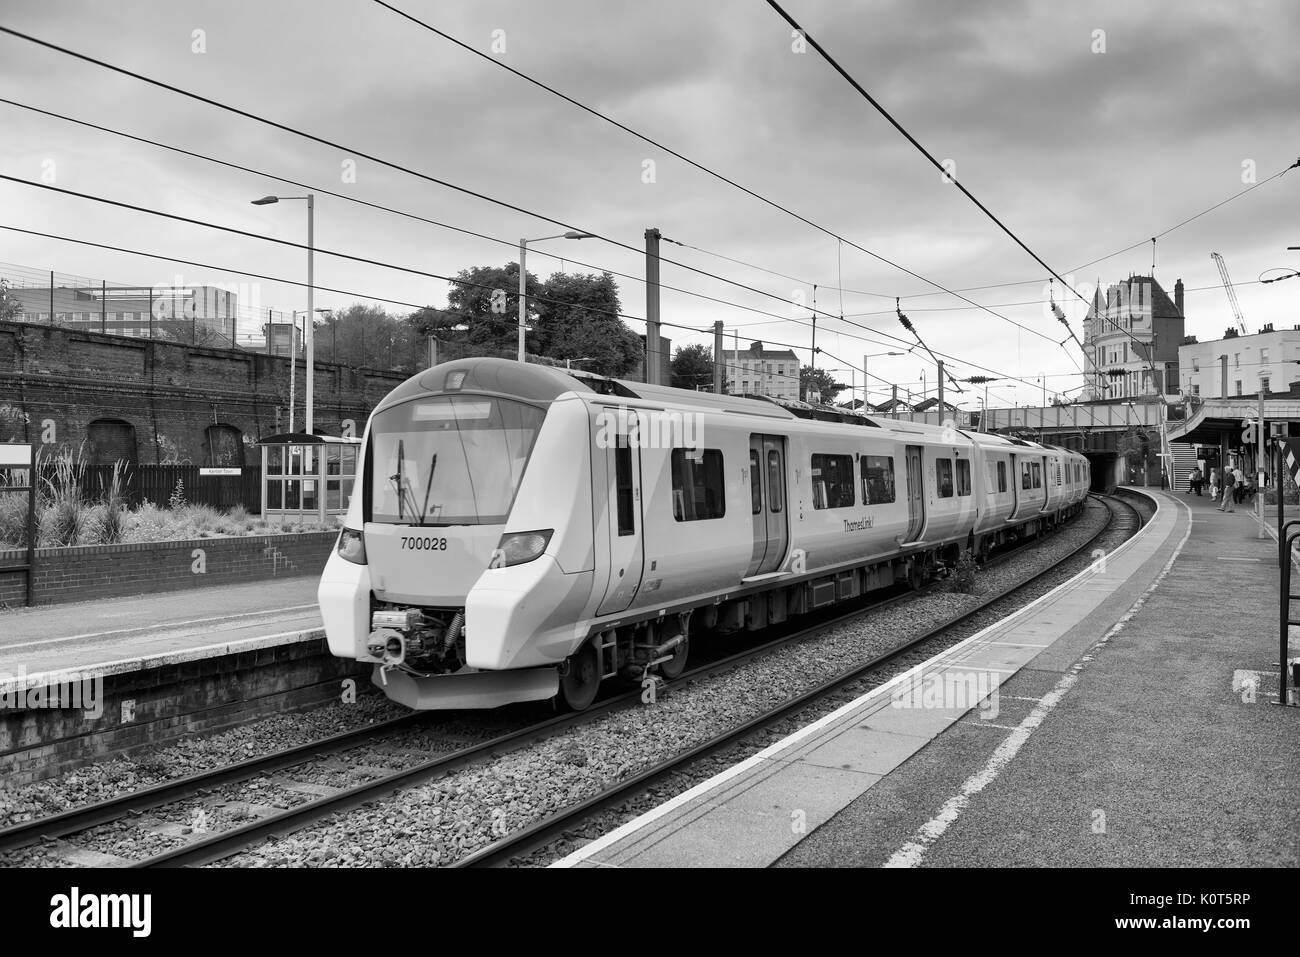 Thameslink train at Kentish Town station in London Stock Photo - Alamy